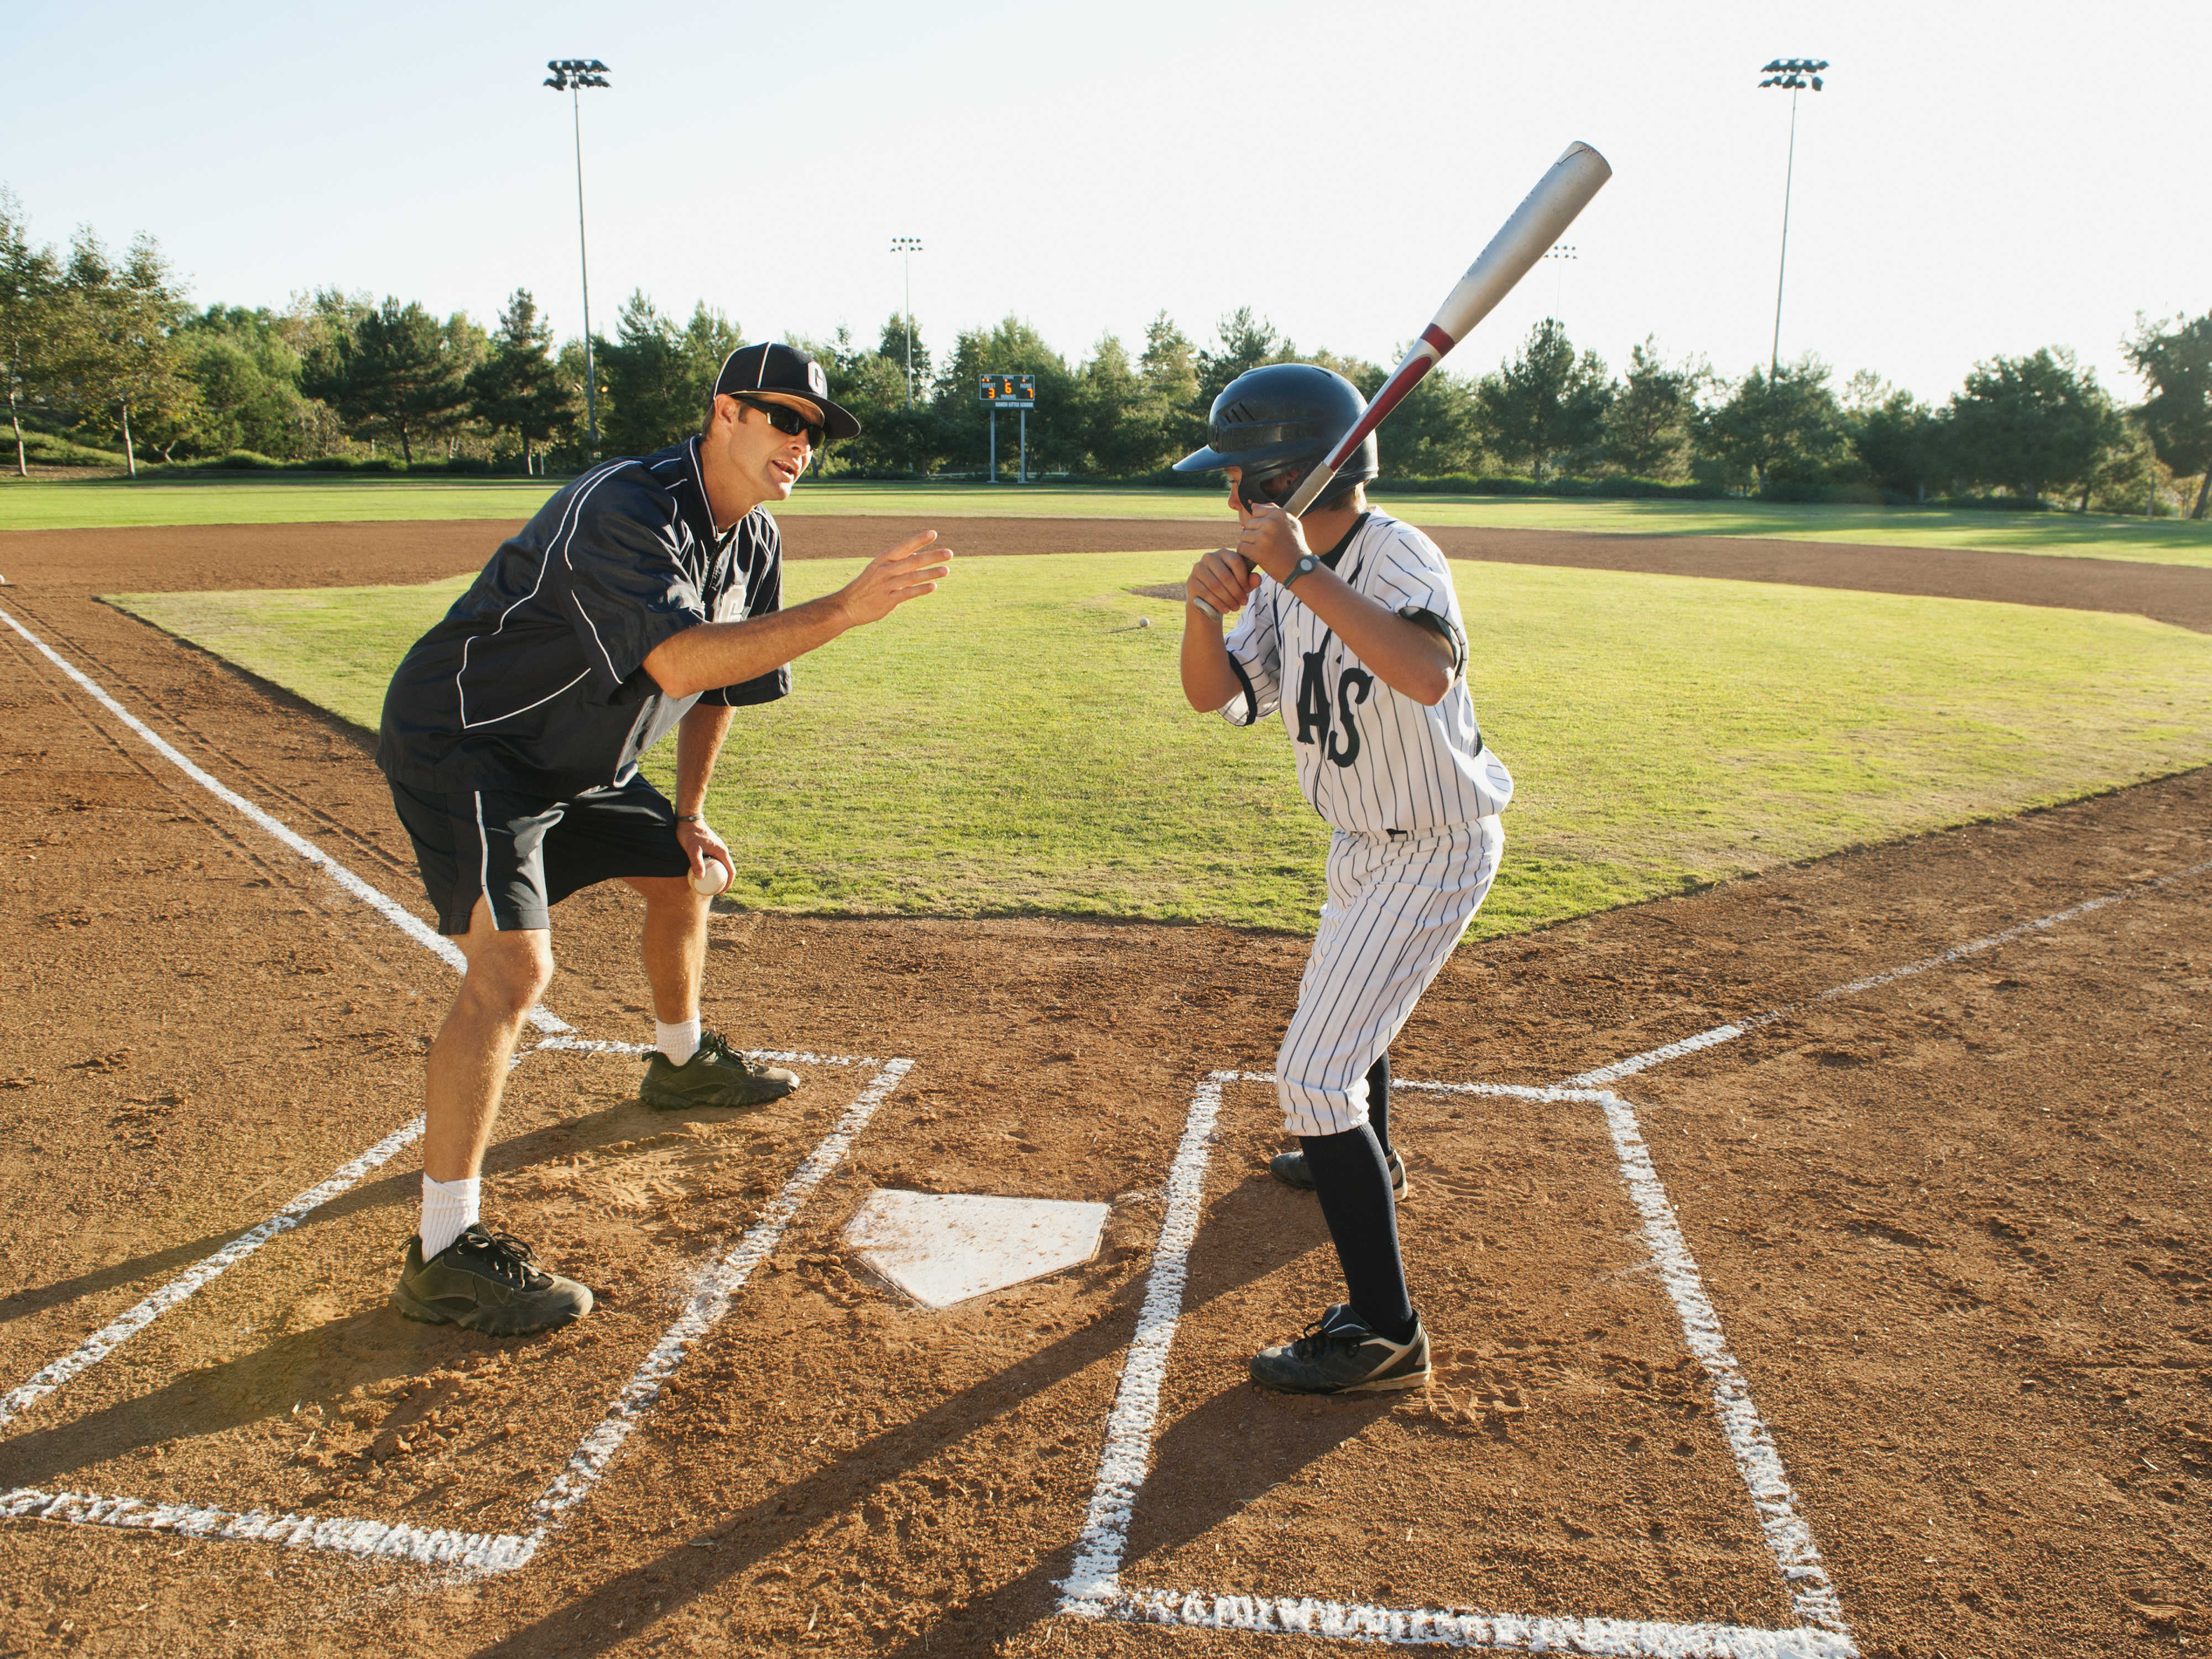 A coach instructs a young baseball player at home plate on a baseball field. Both wear sports attire, with the player in a helmet and holding a bat